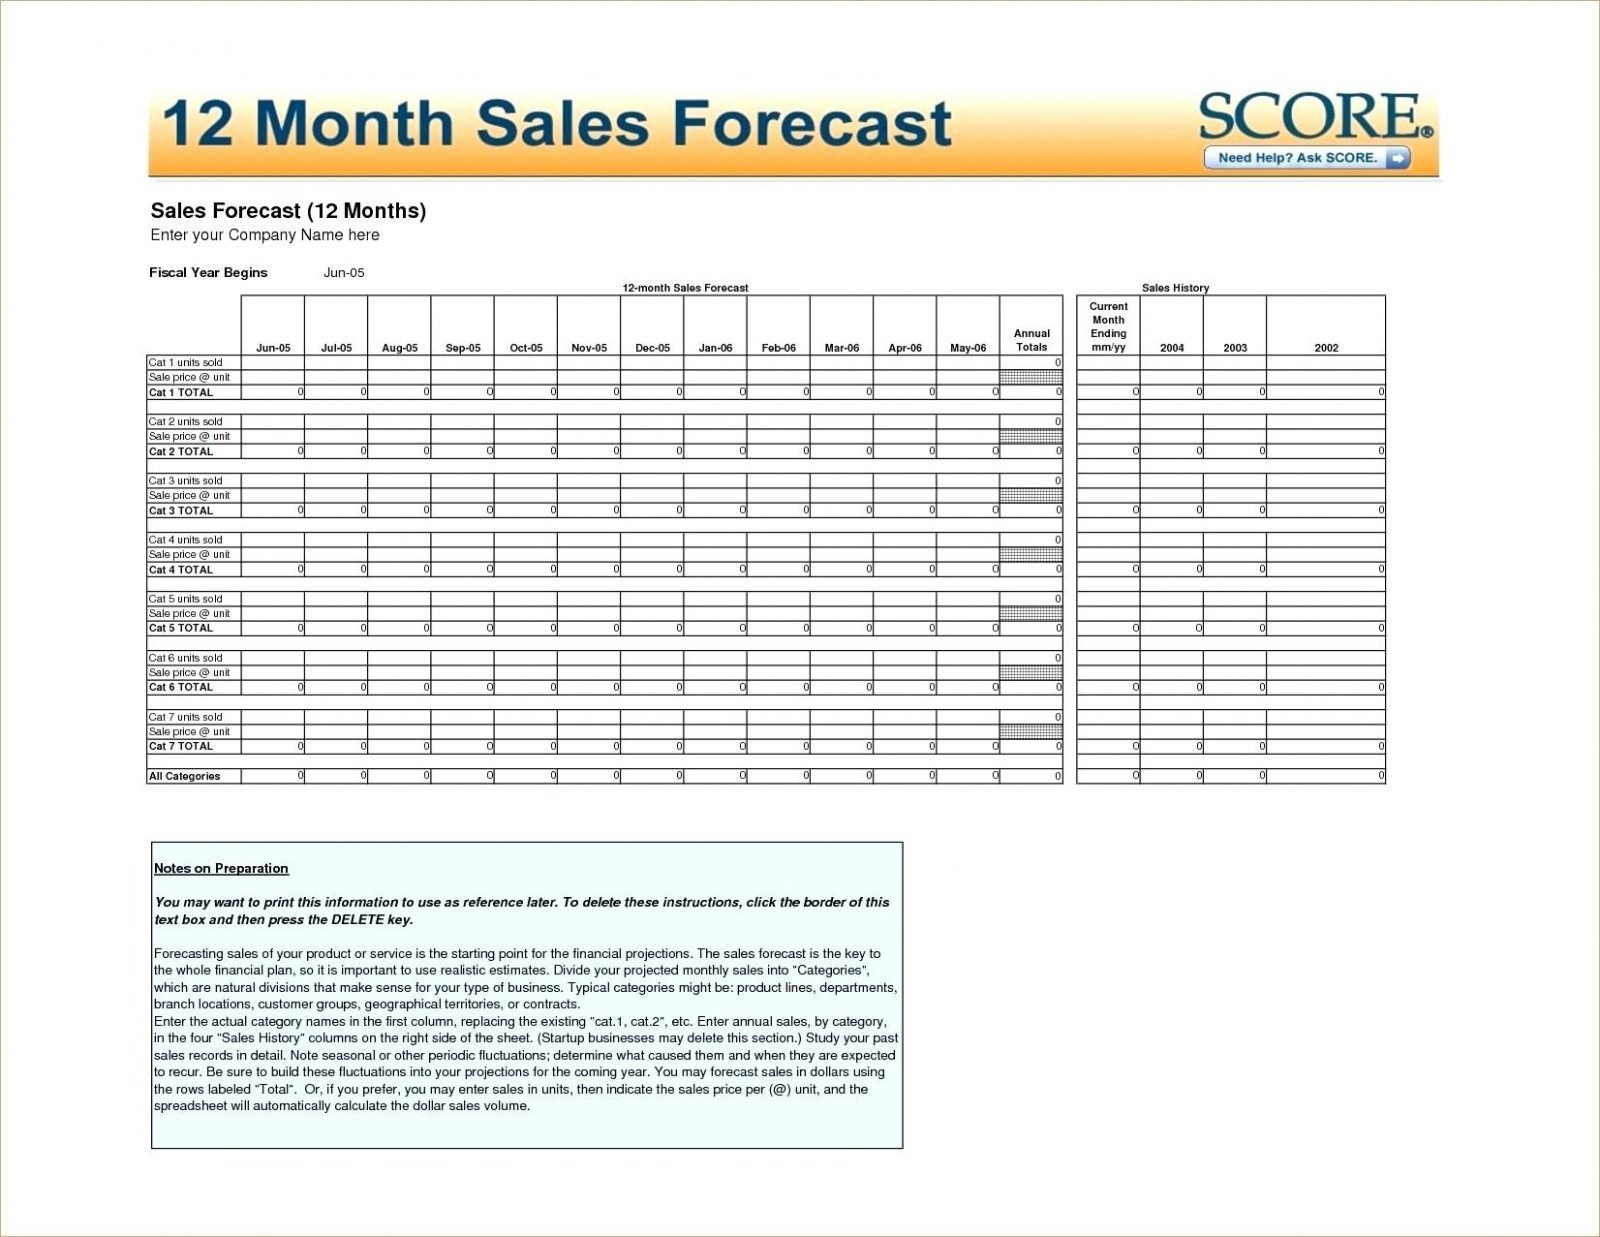 Sales Forecast Template For Startup Business Simple Business Plan throughout Sales Forecast Template For New Business